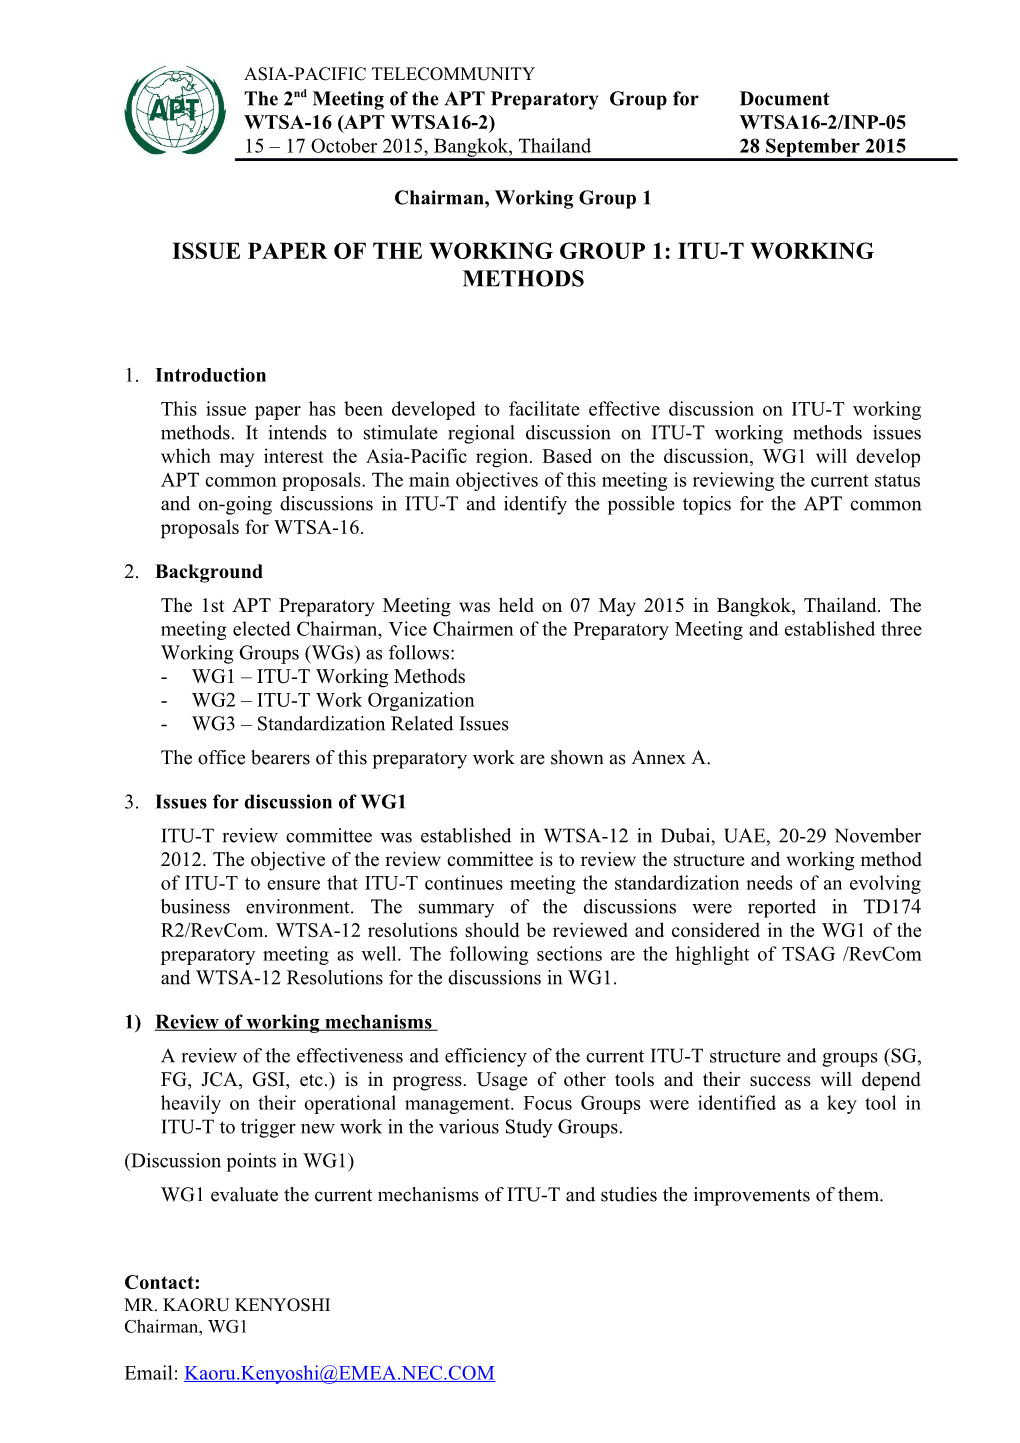 Issue Paper of the Working Group 1: ITU-T Working Methods